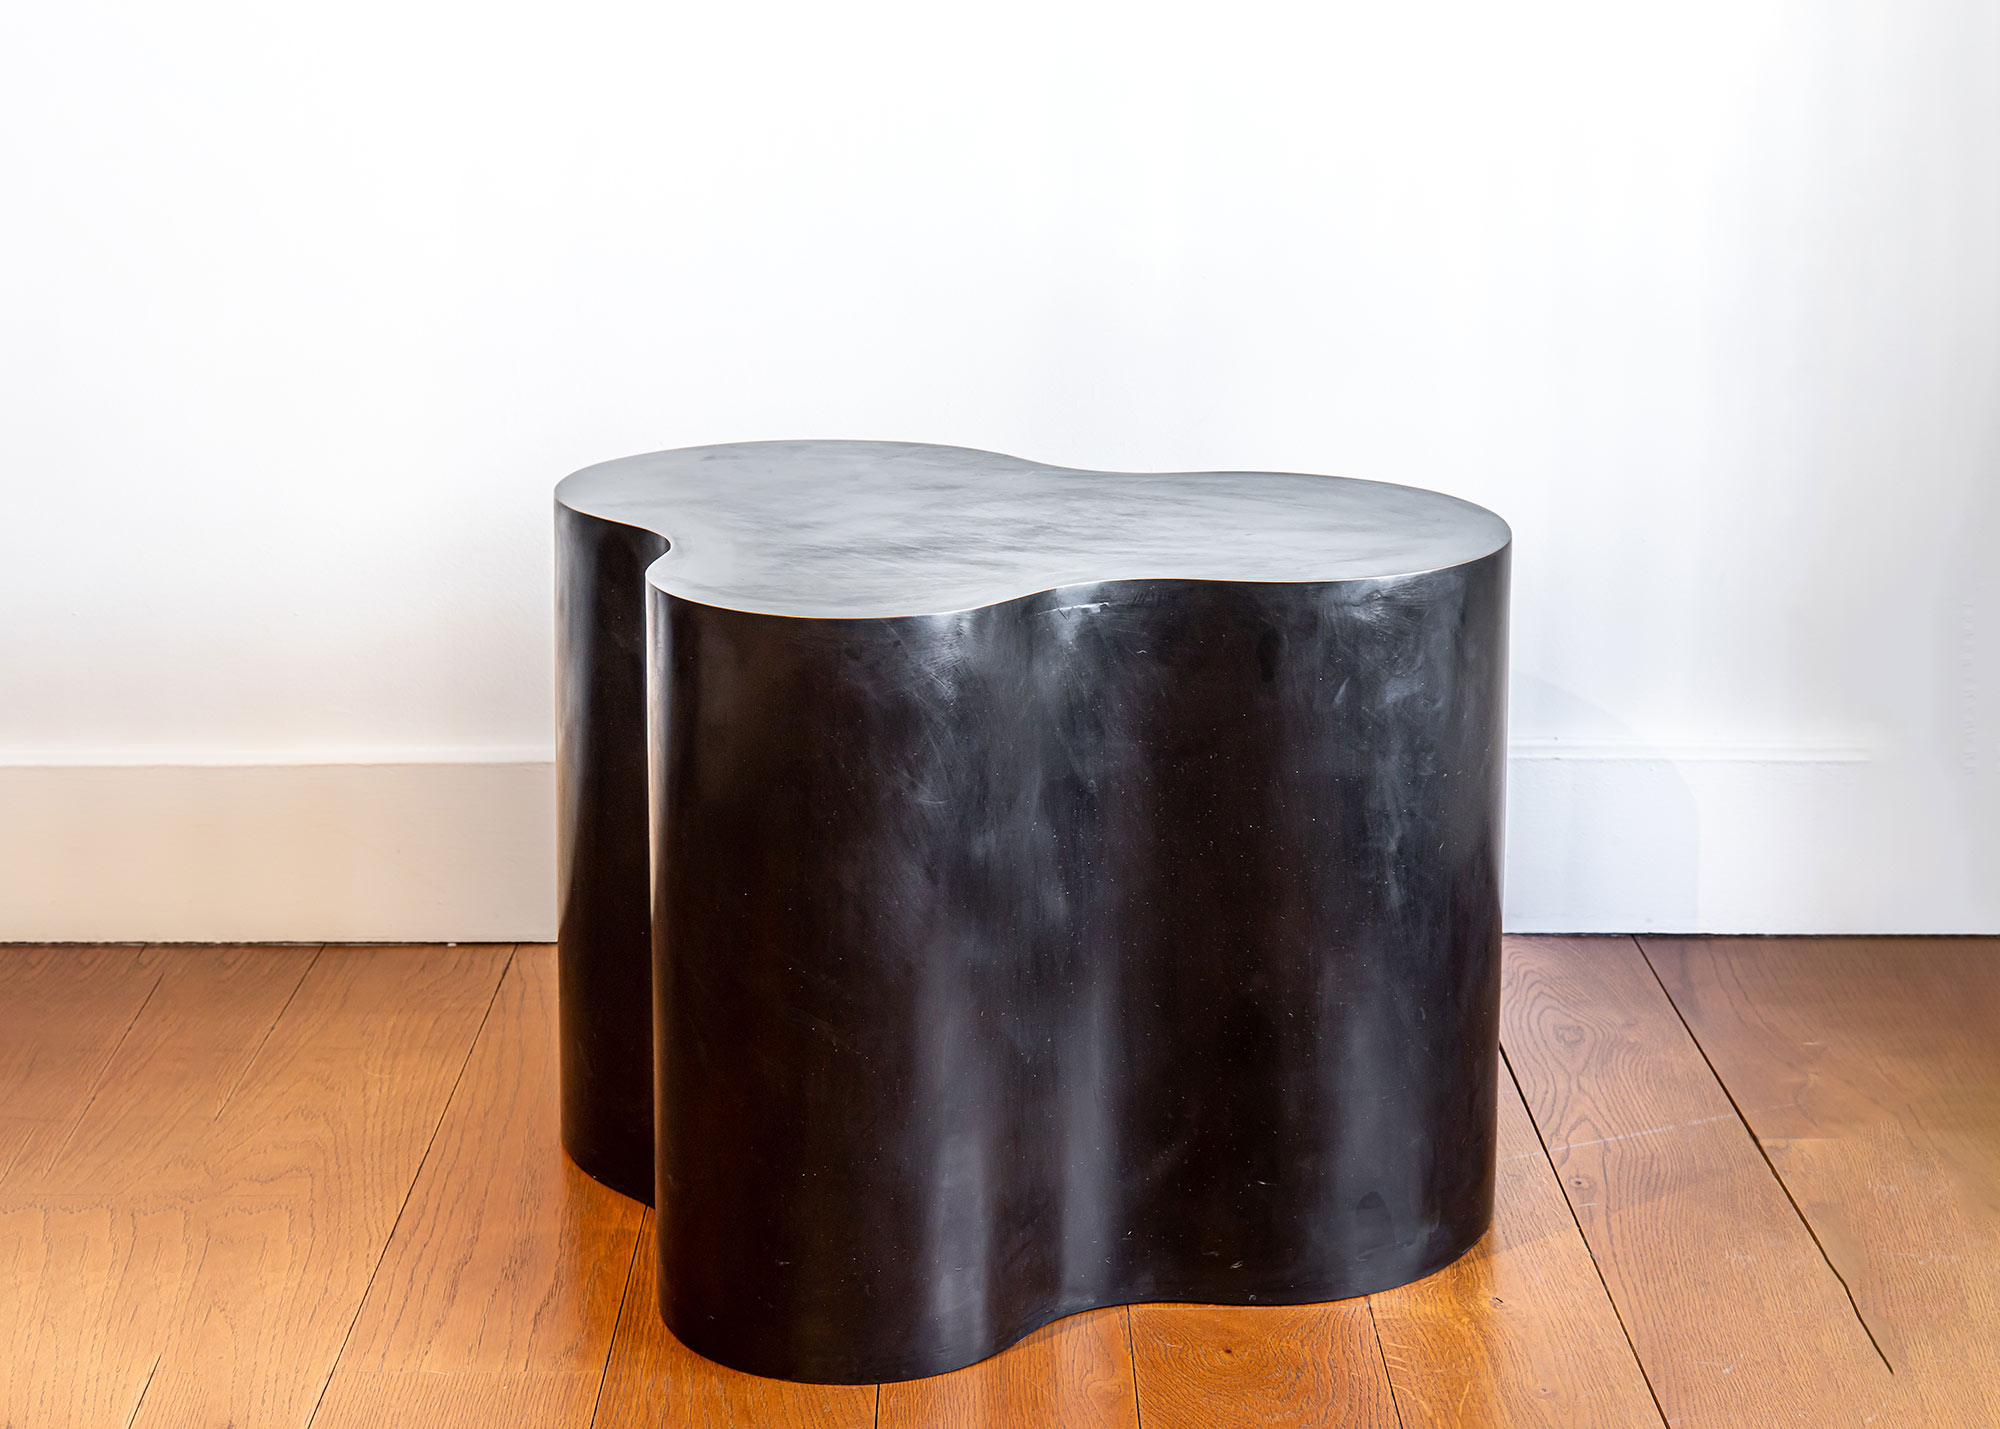 Thierry Lemaire's new furniture design collection pursues timeless ...